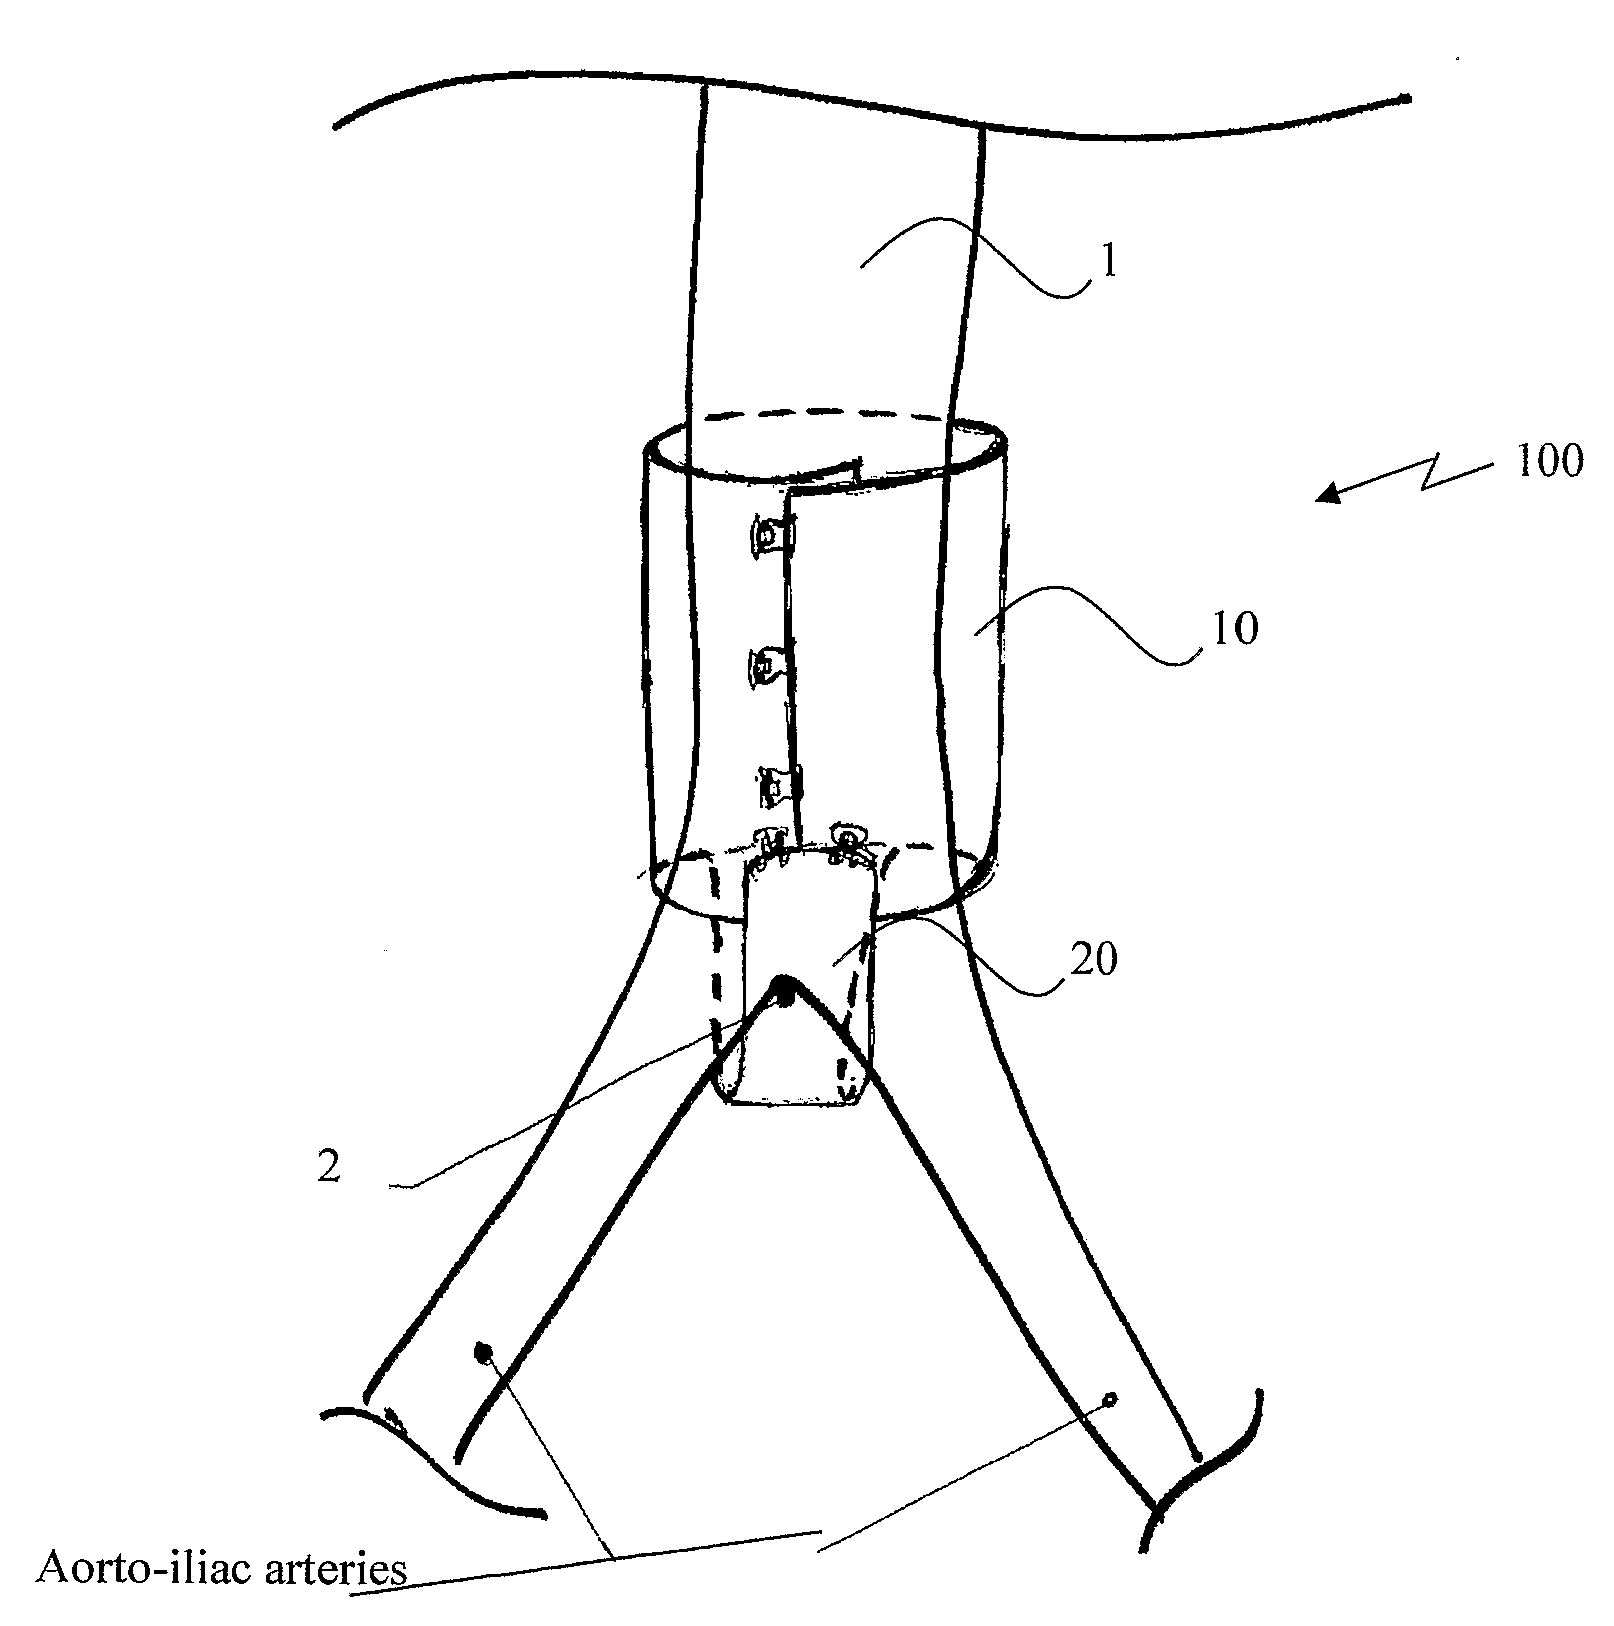 Extra-vascular wrapping for treating aneurysmatic aorta and methods thereof